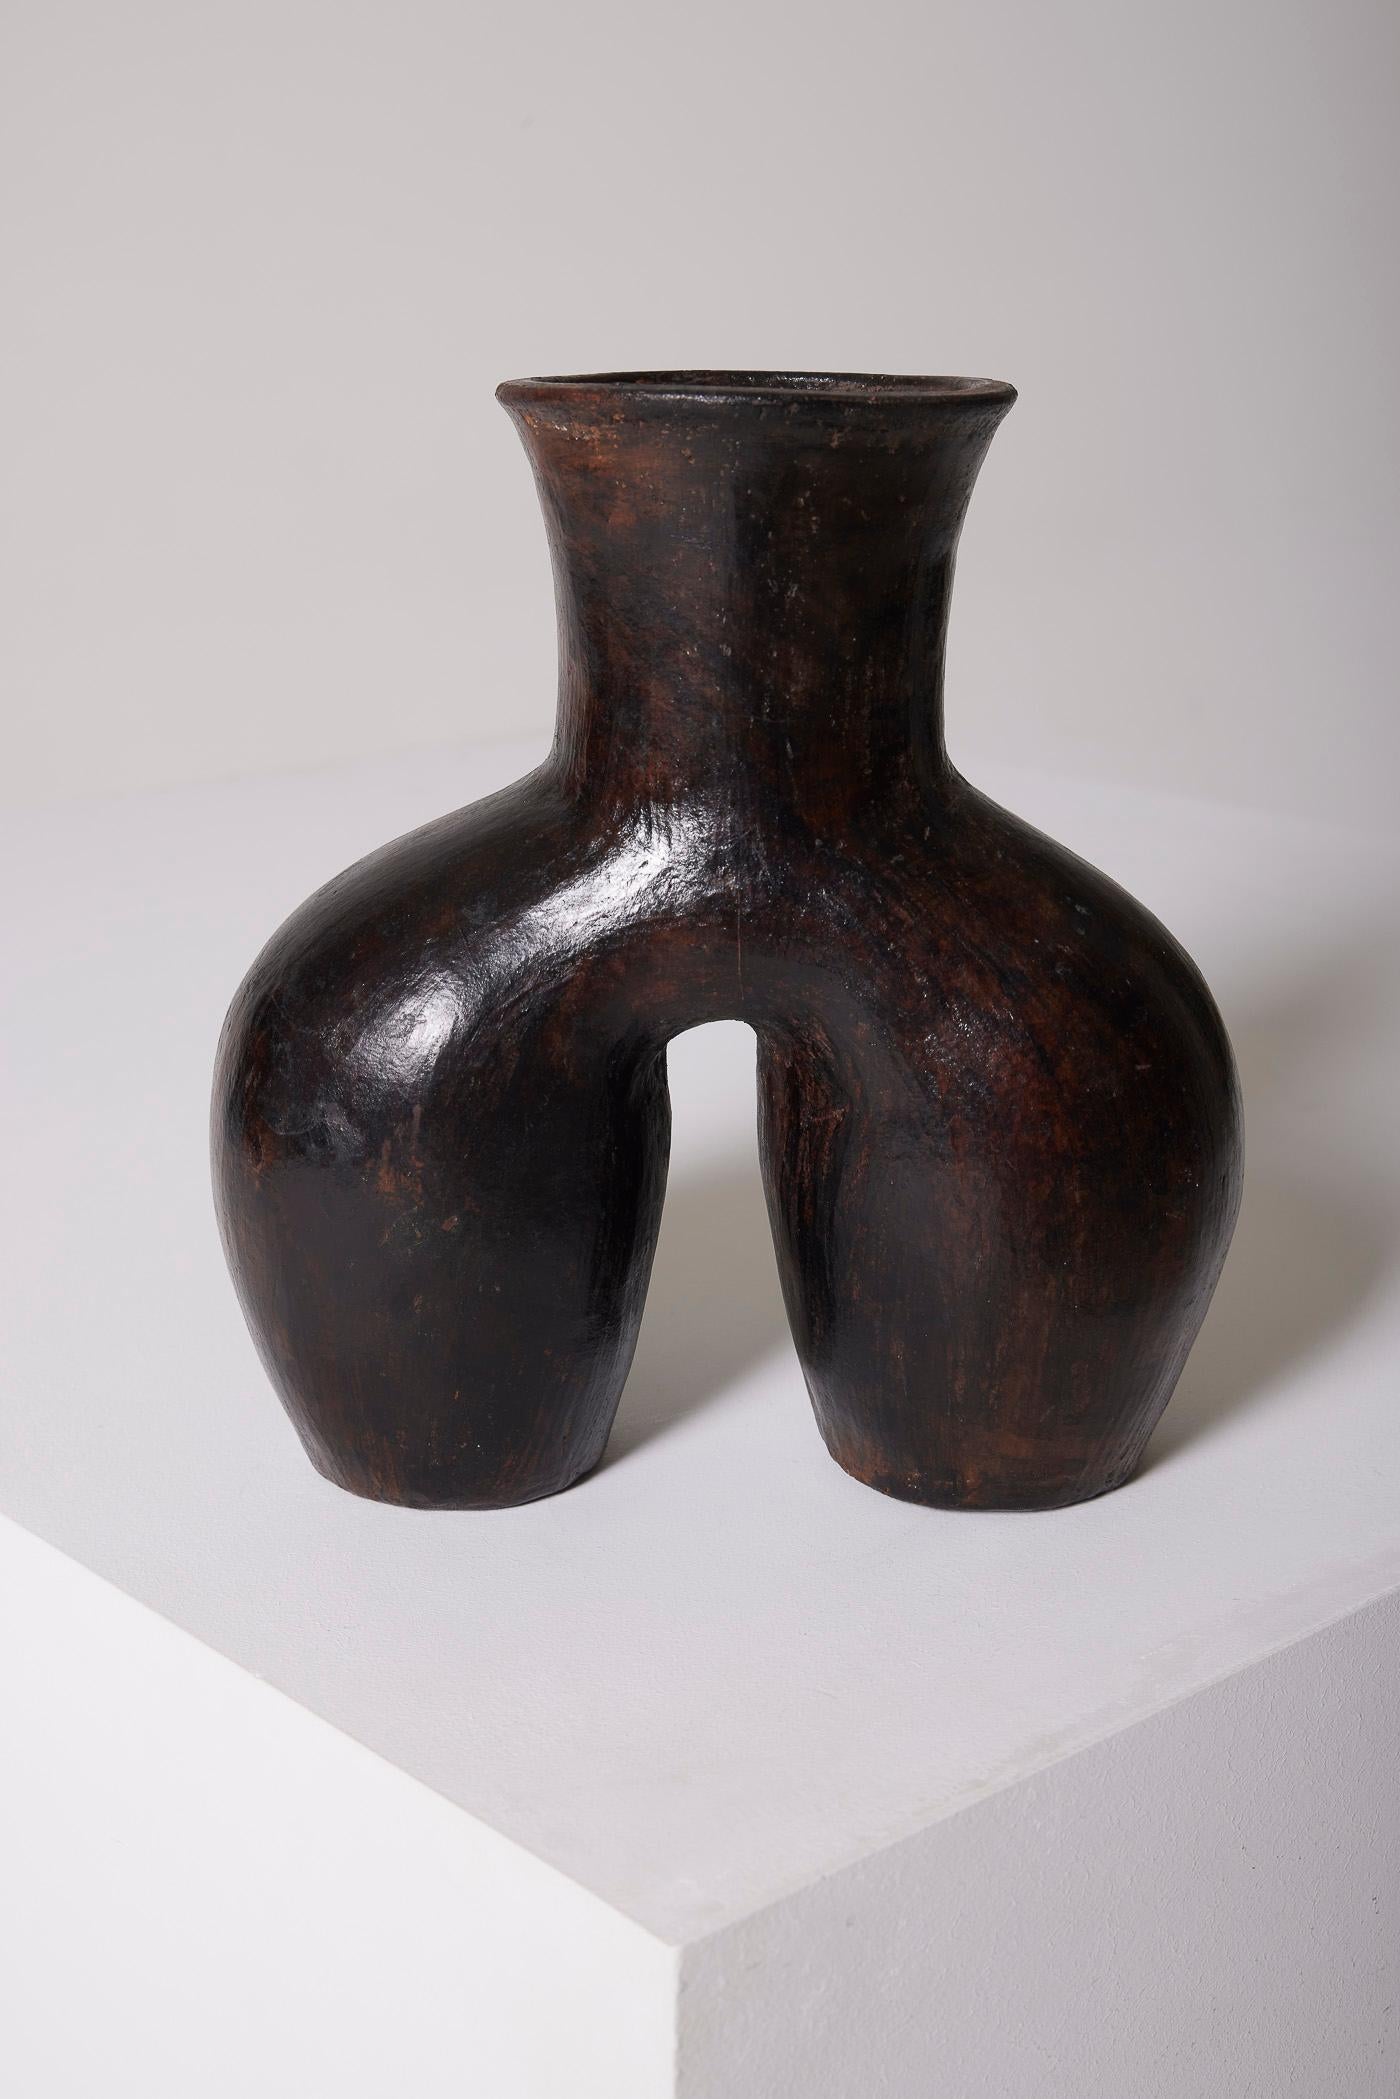 Terracotta vase with an anthropomorphic shape. African artisanal vase. In perfect condition.
LP2660 - LP2661